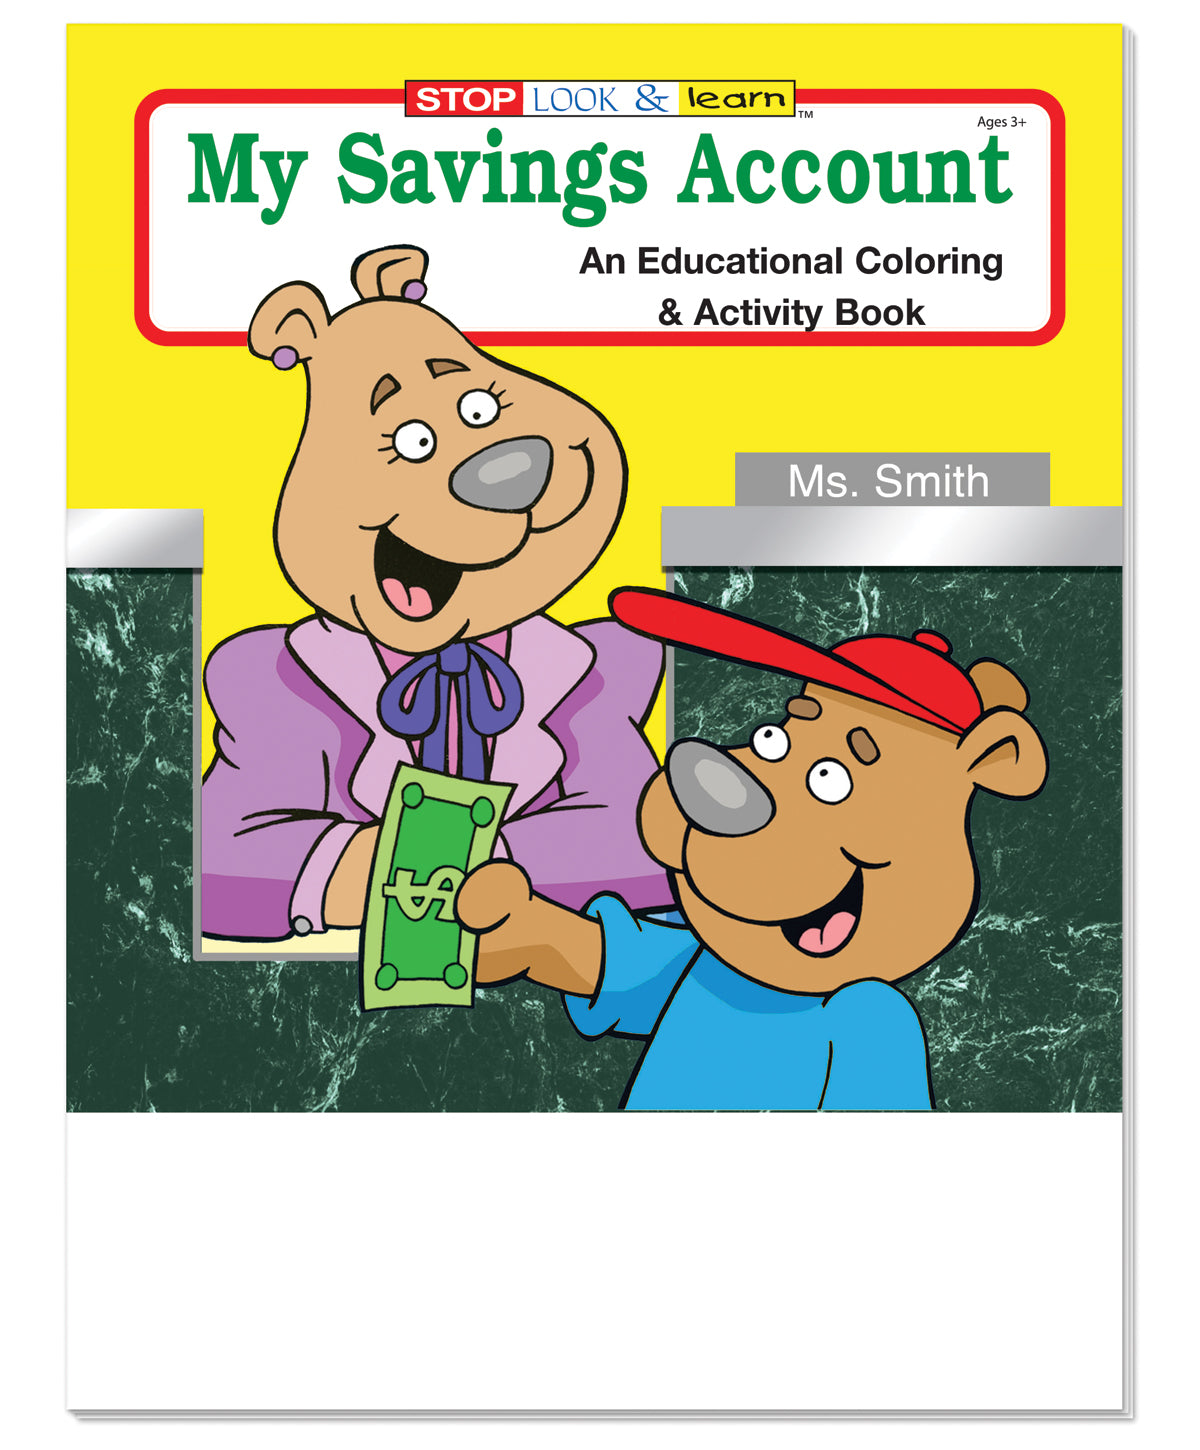 My Savings Account Kid's Coloring & Activity Books